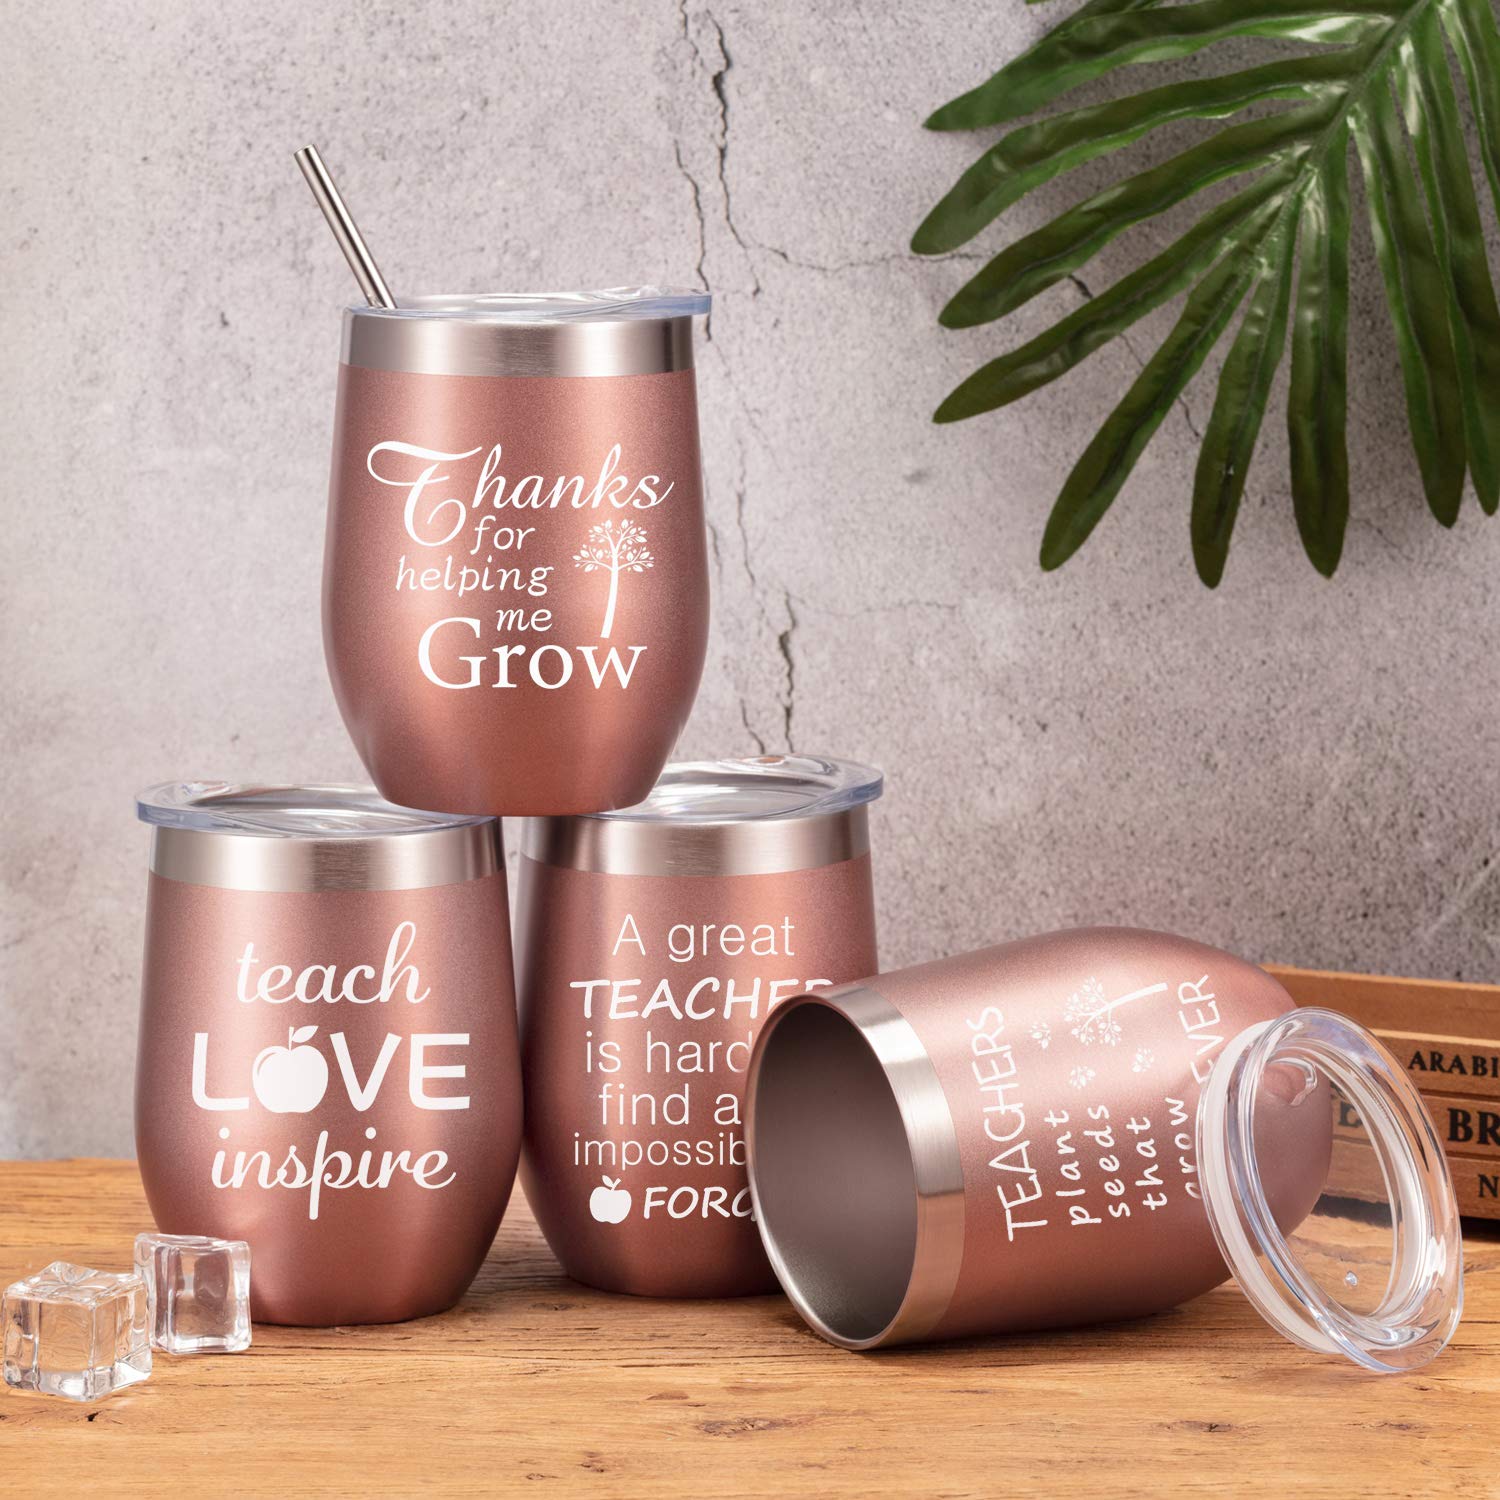 Boao 4 Pieces Teacher Gifts Wine Tumbler Set Teacher Appreciation Gifts, Funny Thank You Birthday Graduation Christmas Gifts for Teachers Professors, 12oz Coffee Mug with Lid Straw (Rose Gold)